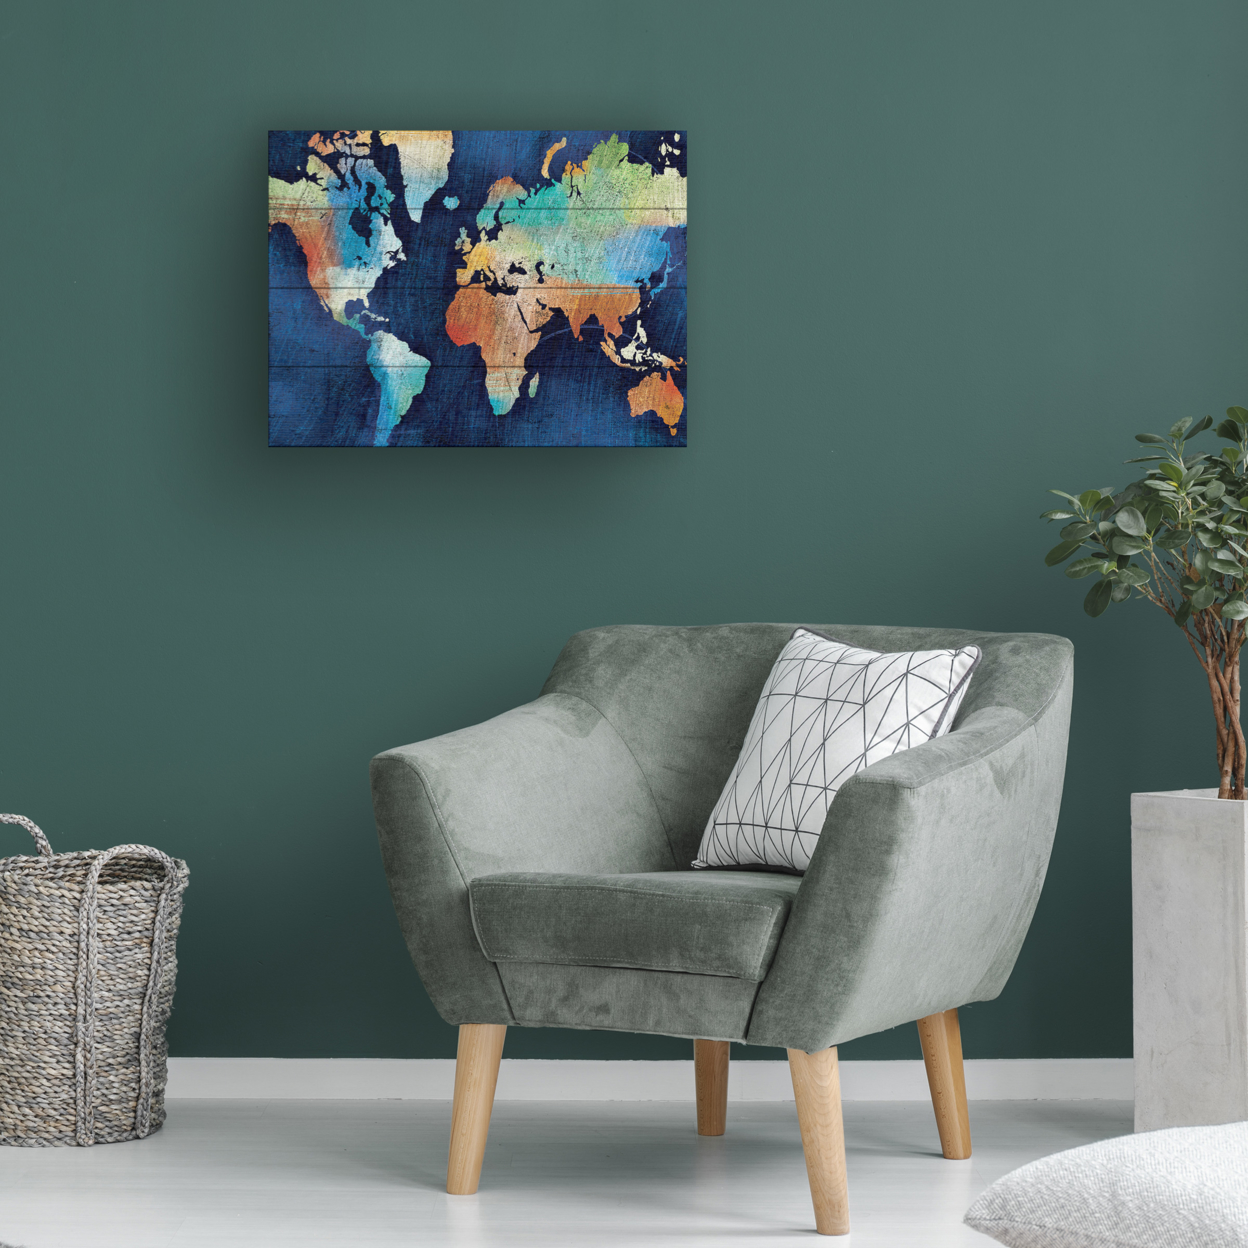 Wall Art 12 X 16 Inches Titled Seasons Change Ready To Hang Printed On Wooden Planks